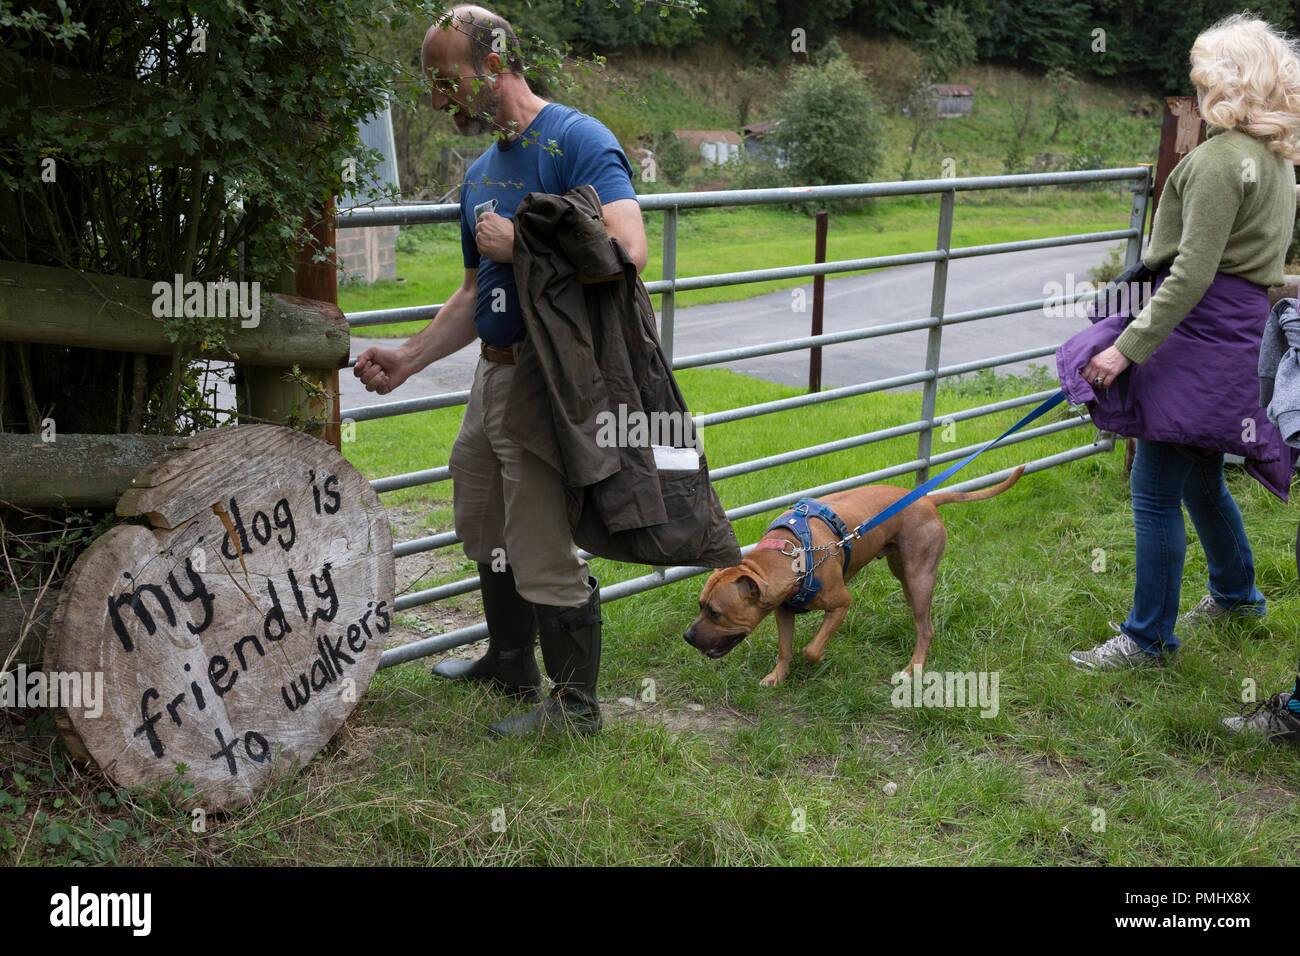 Country walkers pass through a gate with their dog, next to a sign reassuring those entering a field that a pet nearby is walker-friendly, on 10th September 2018, near Lingen, Herefordshire, England UK. Stock Photo